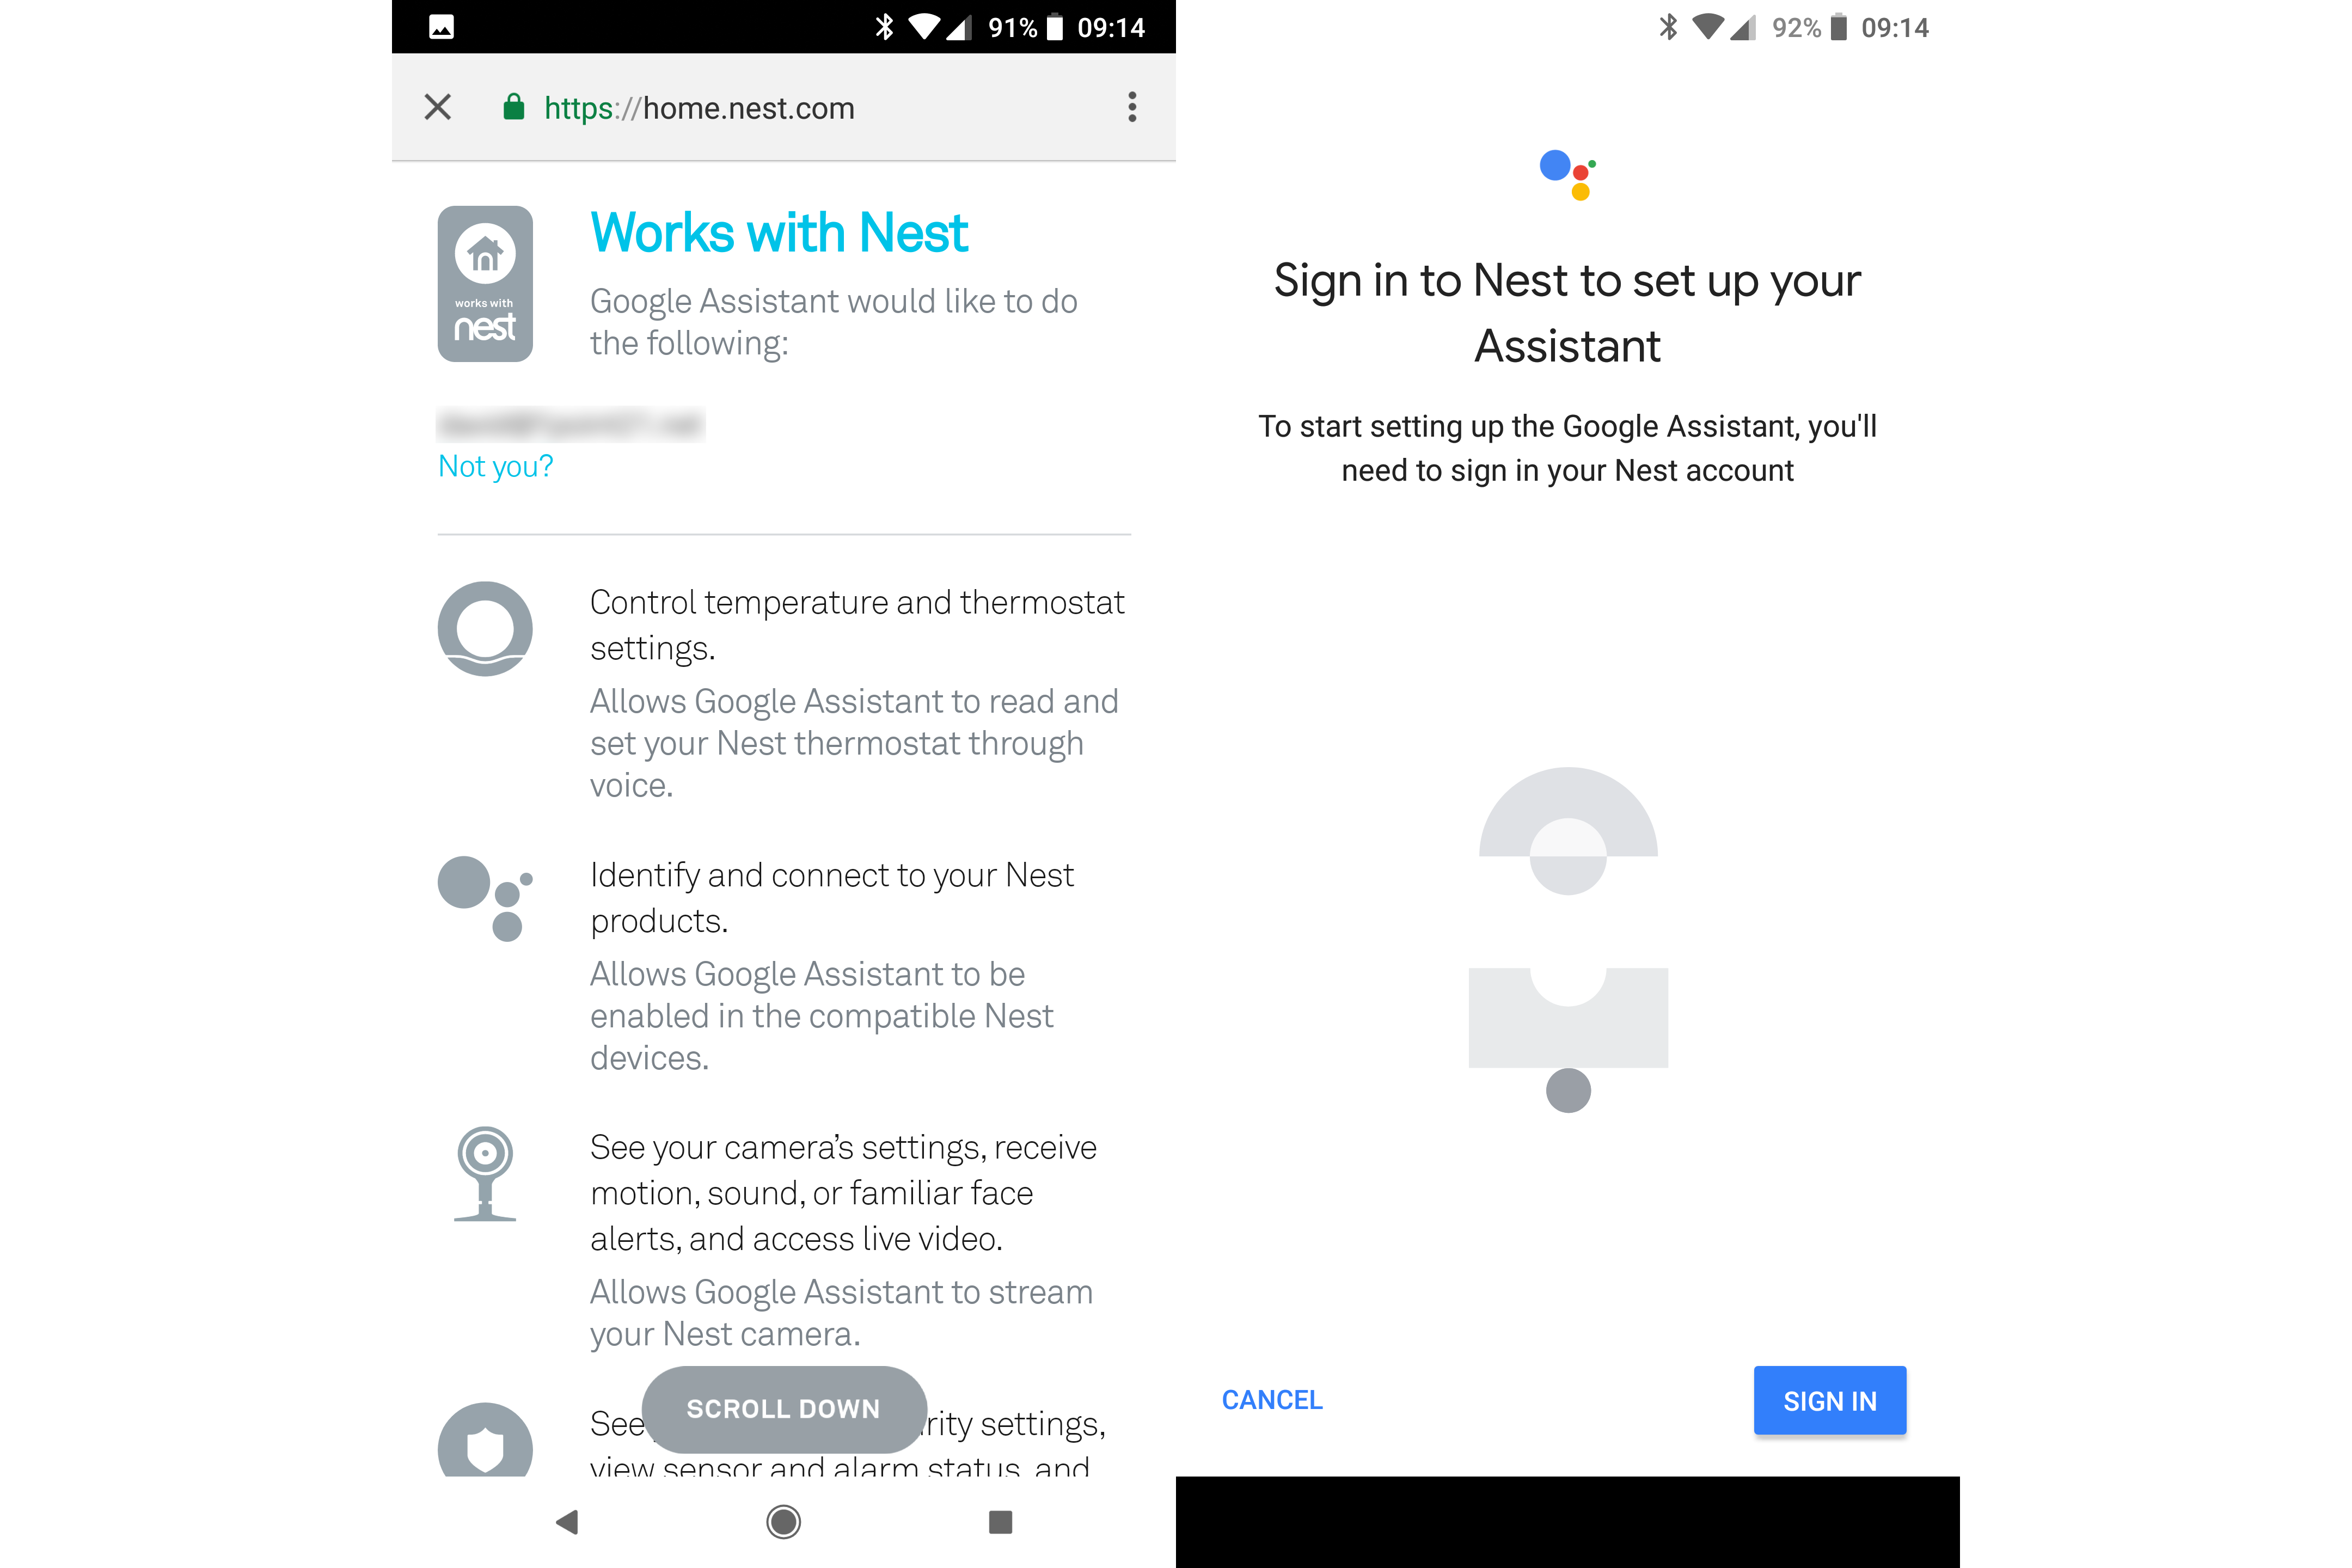 Smartphone screen showing Nest integration with Google Assistant prompt.